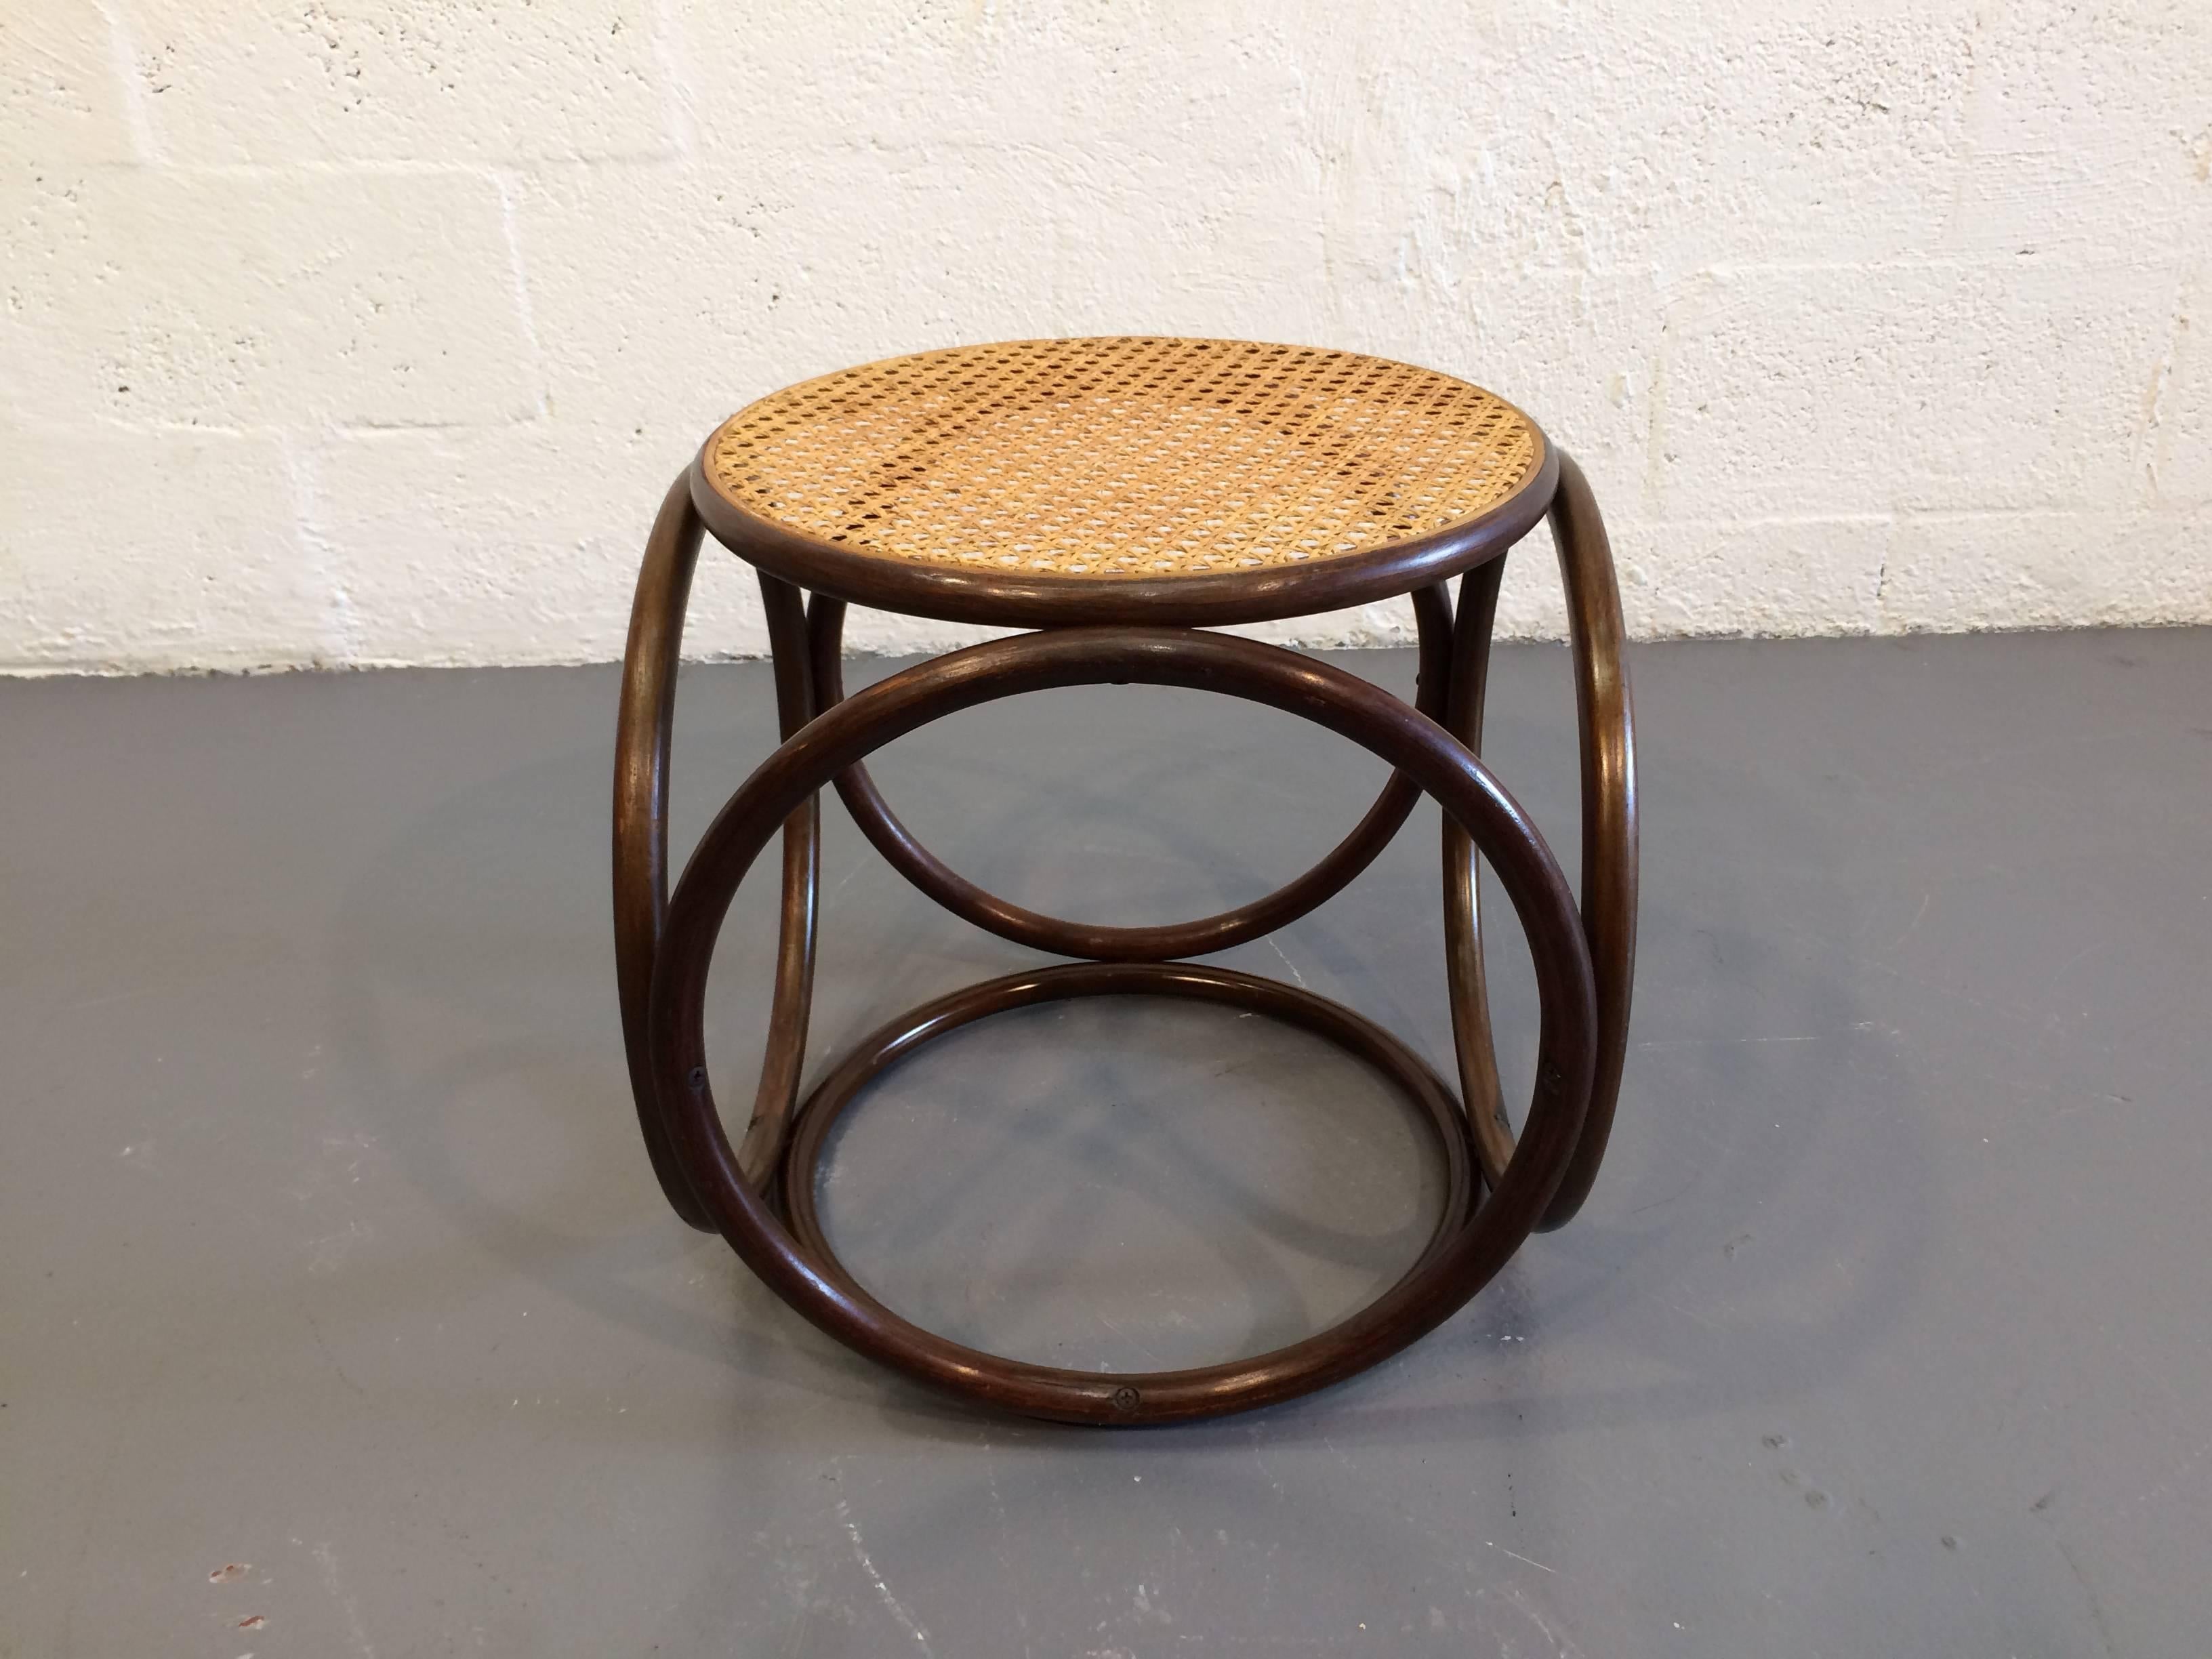 Timeless beautiful bentwood and cane stool.